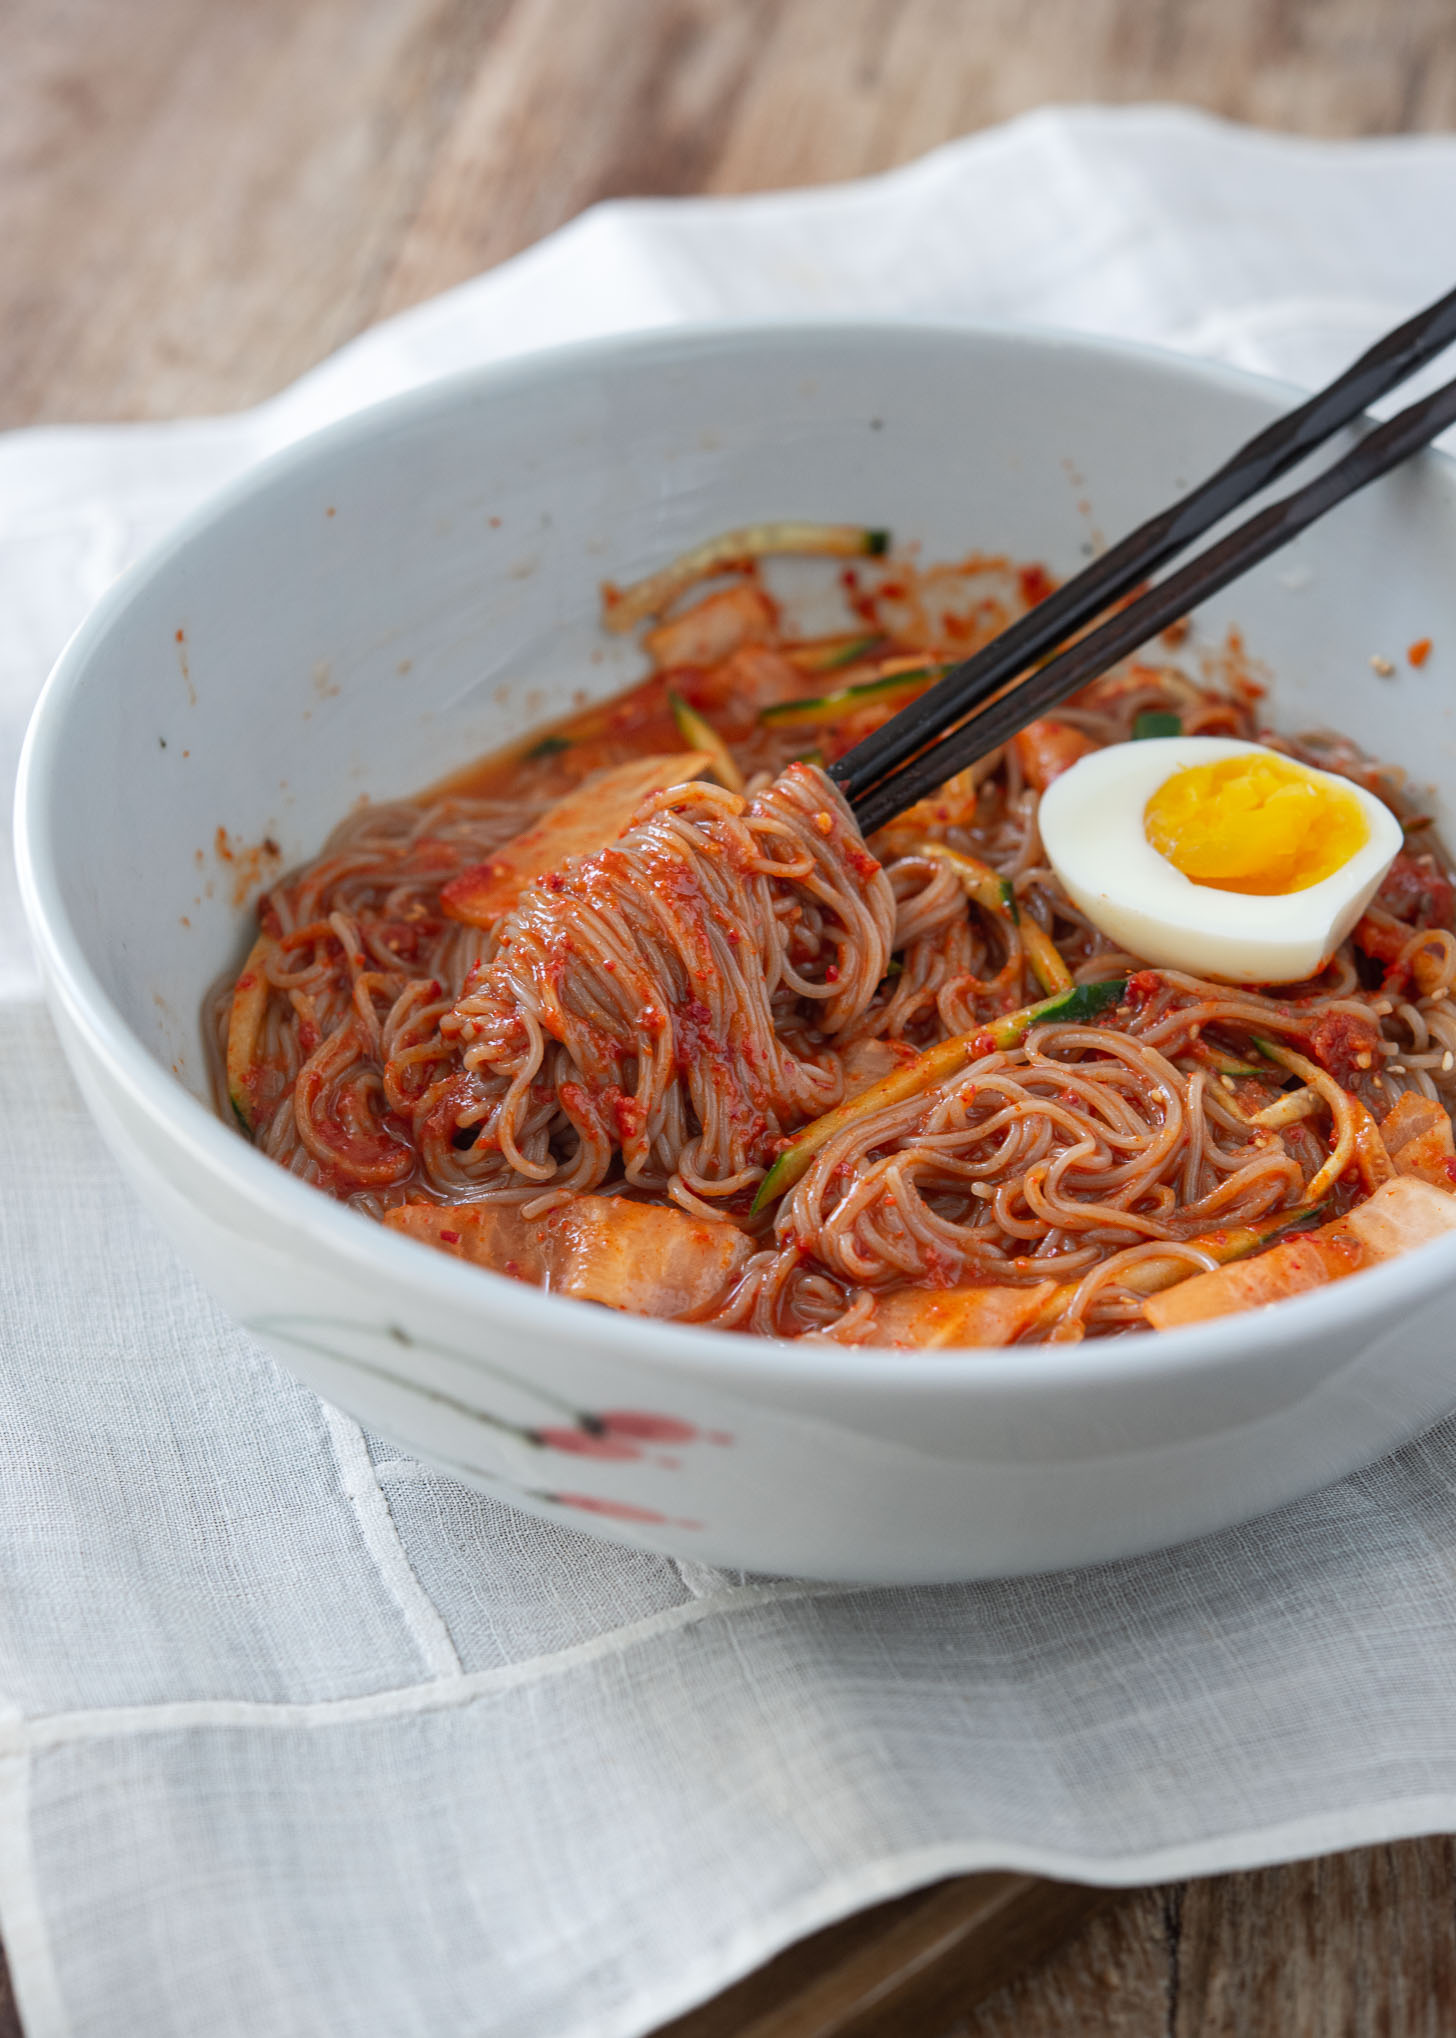 Spicy naengmyeon mixed with bibim sauce.